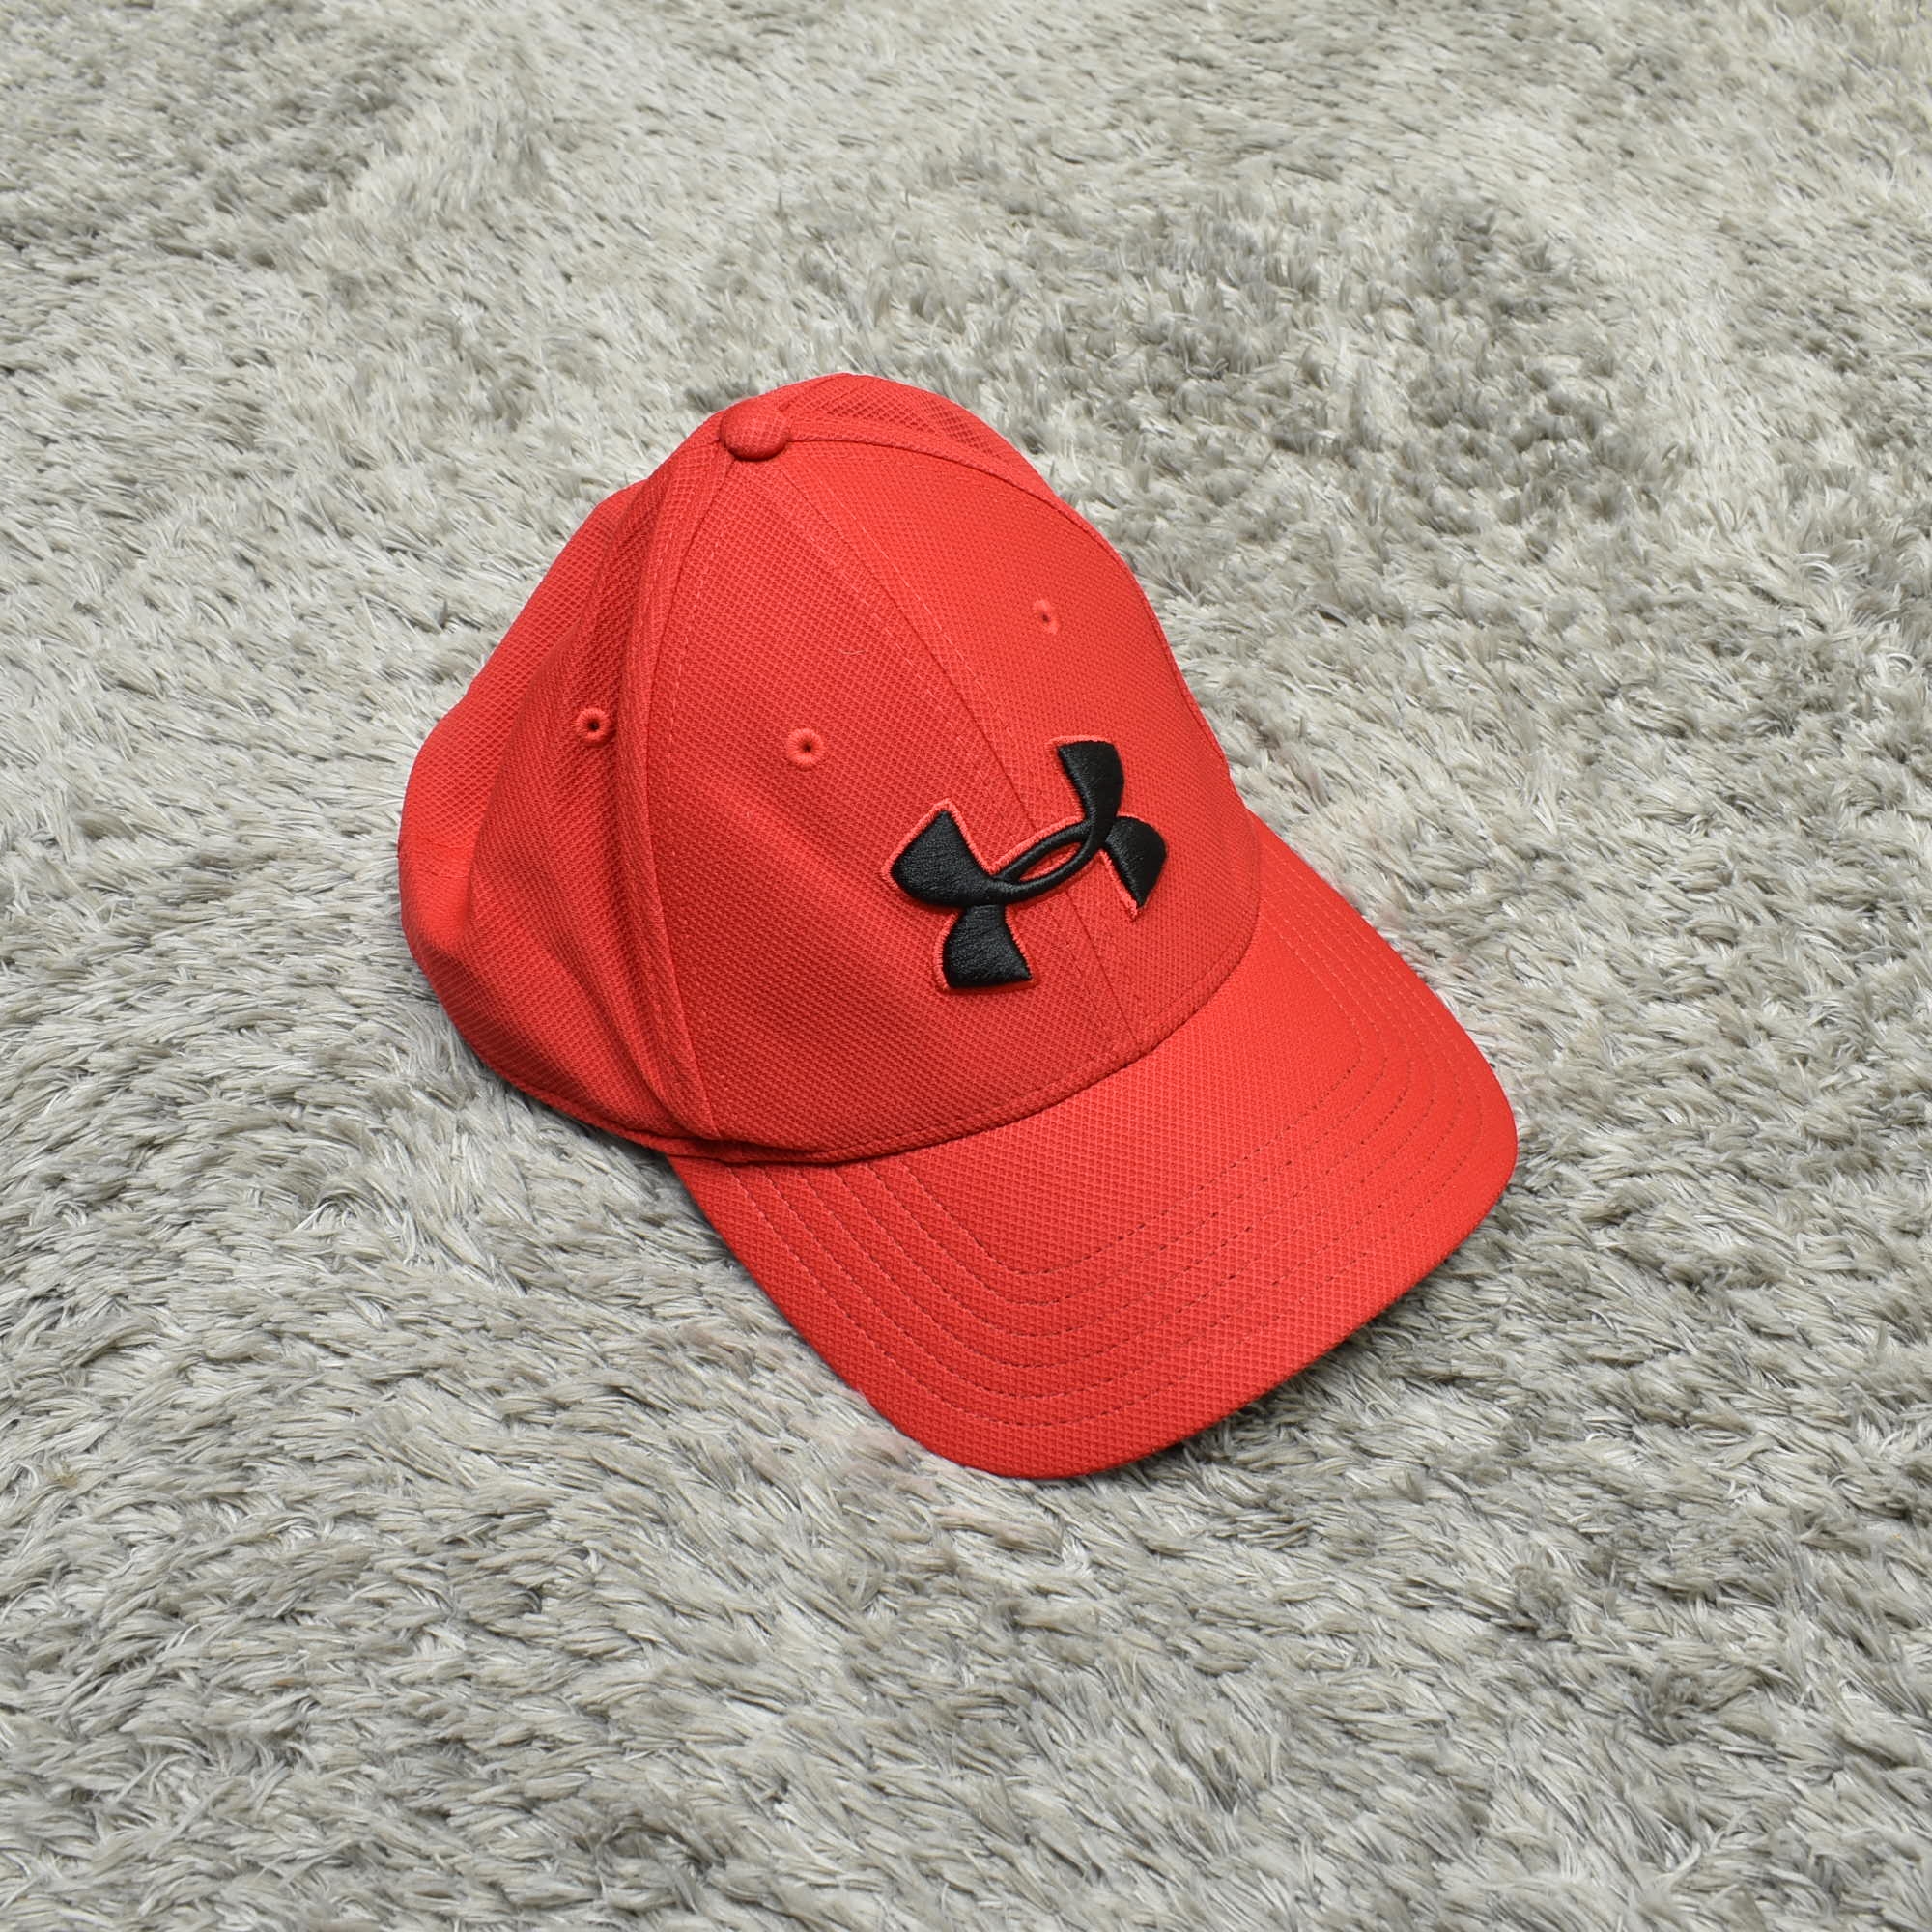 Under Armour Baseball Cap One Size Red Men Adjustable Classic Fit